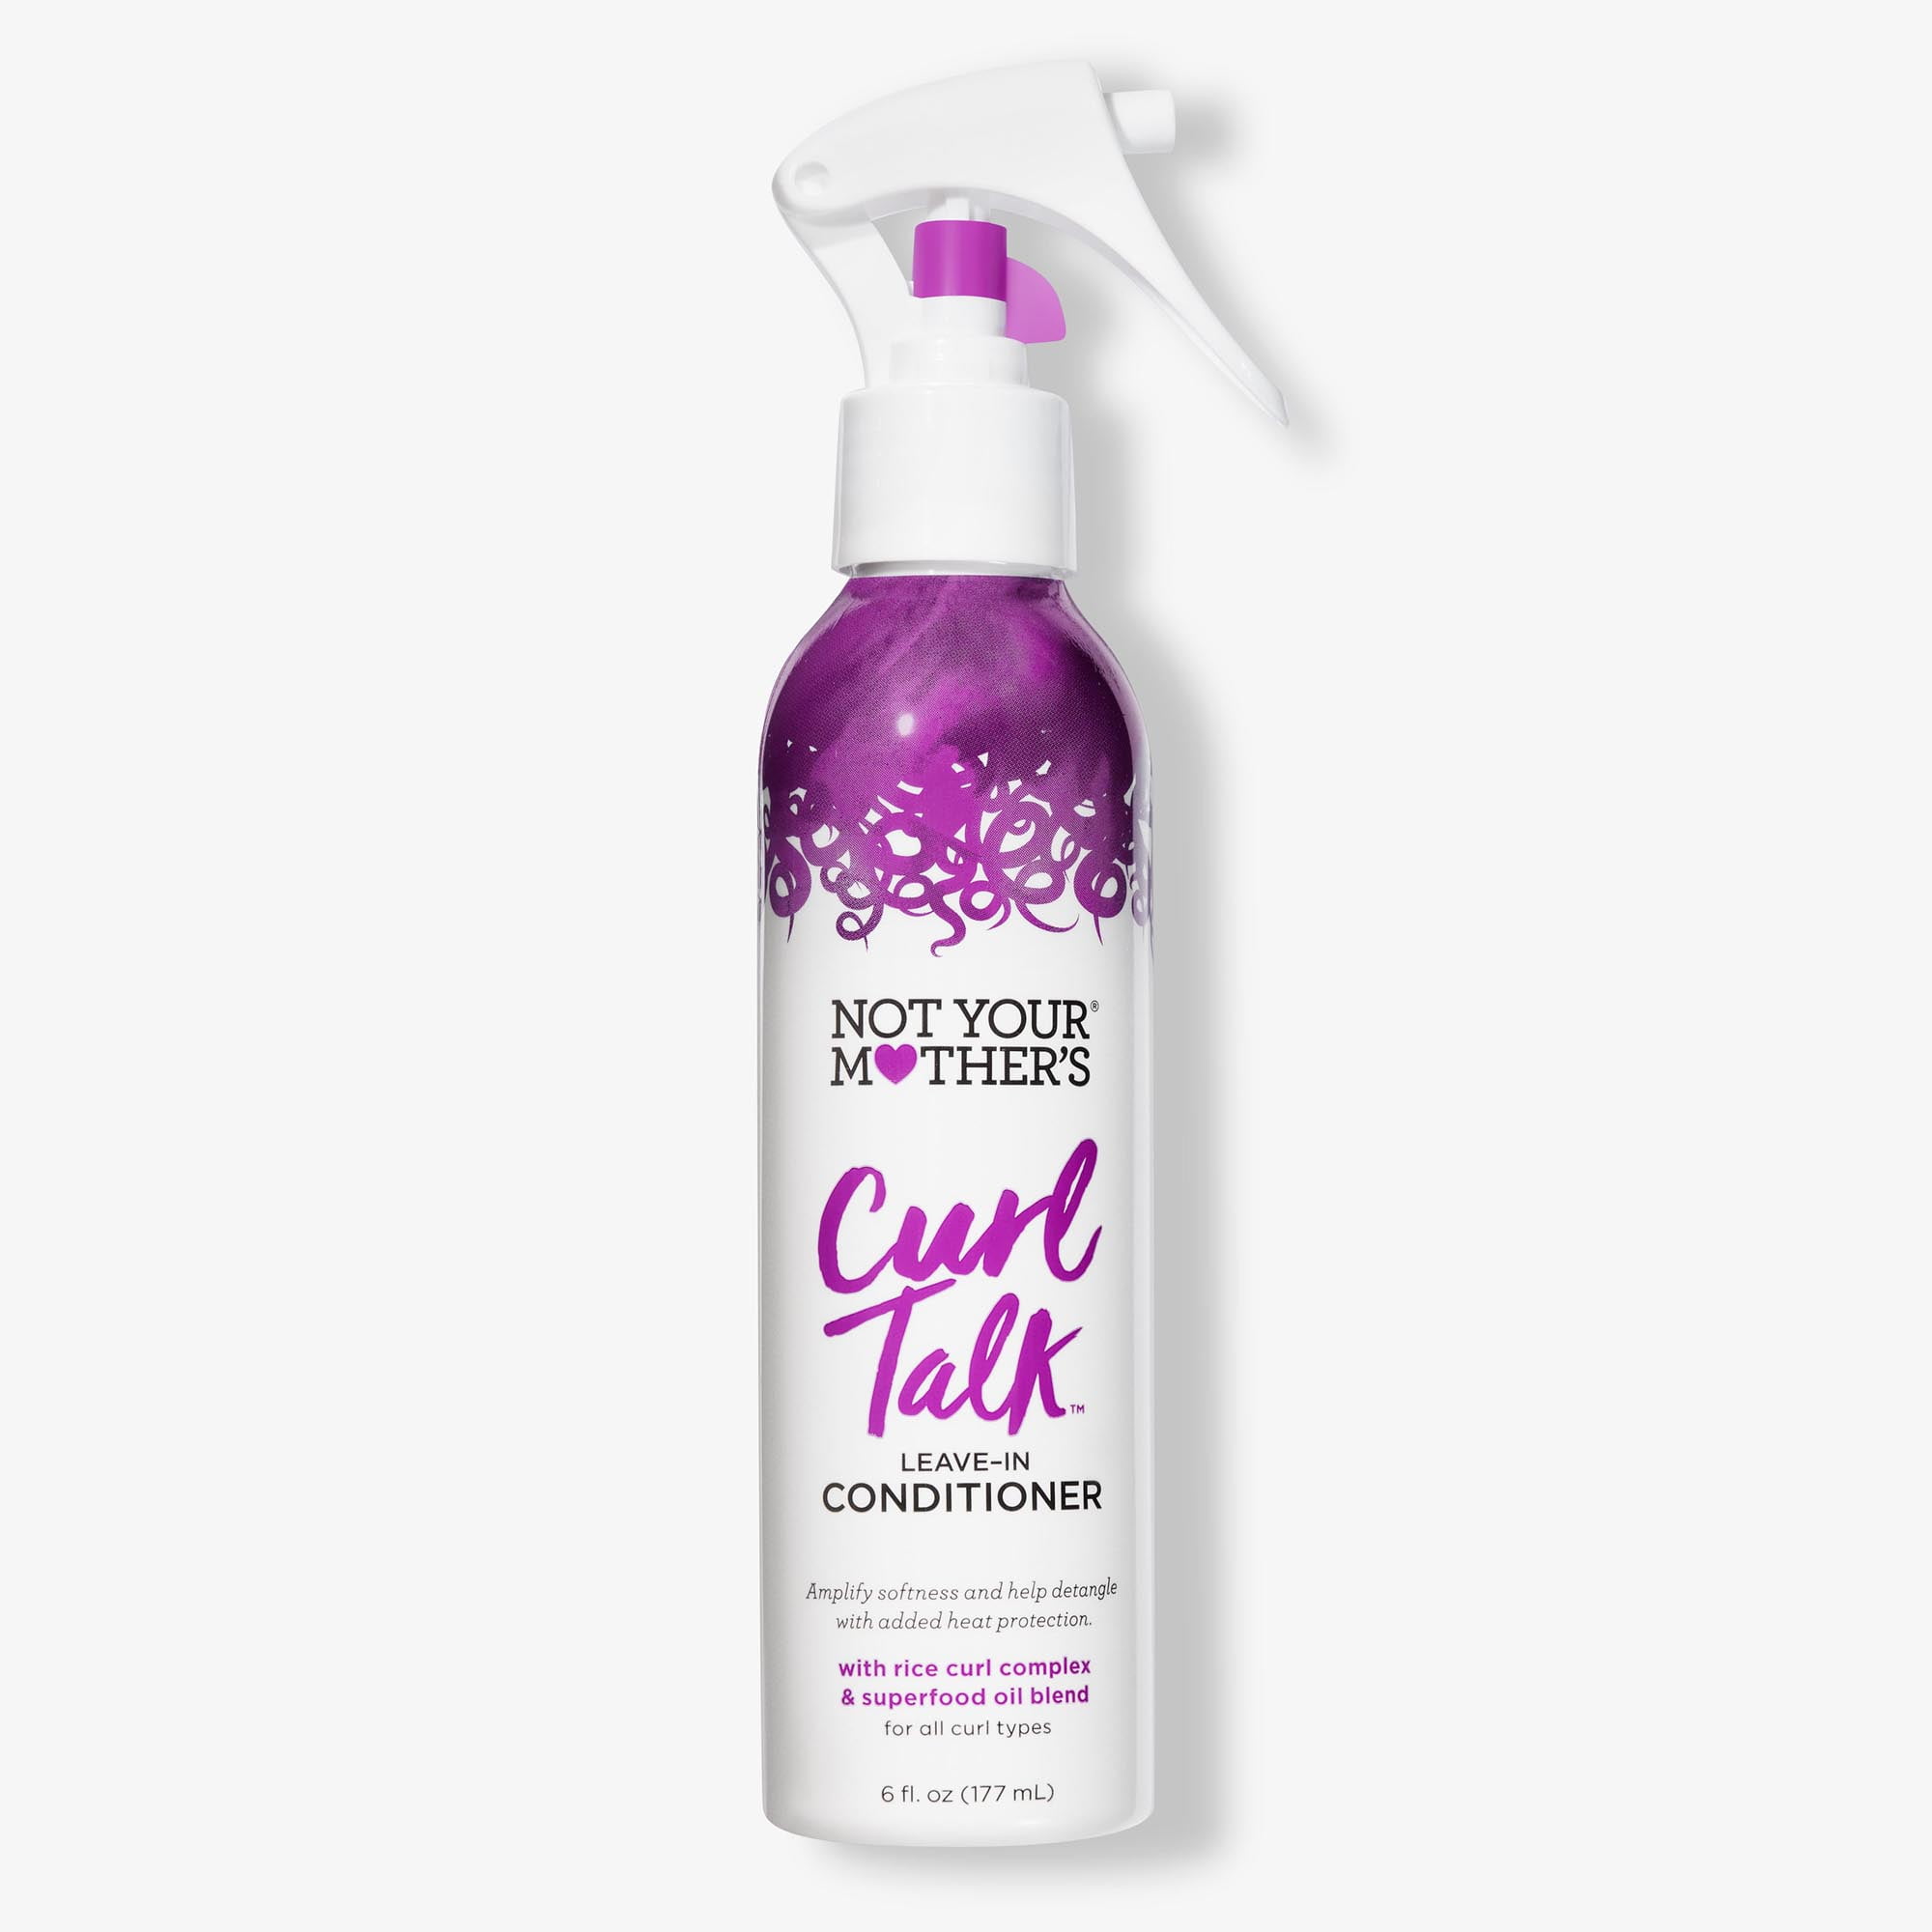 Not Your Mother's Curl Talk Leave-In Conditioner Spray, 6 oz - Walmart.com